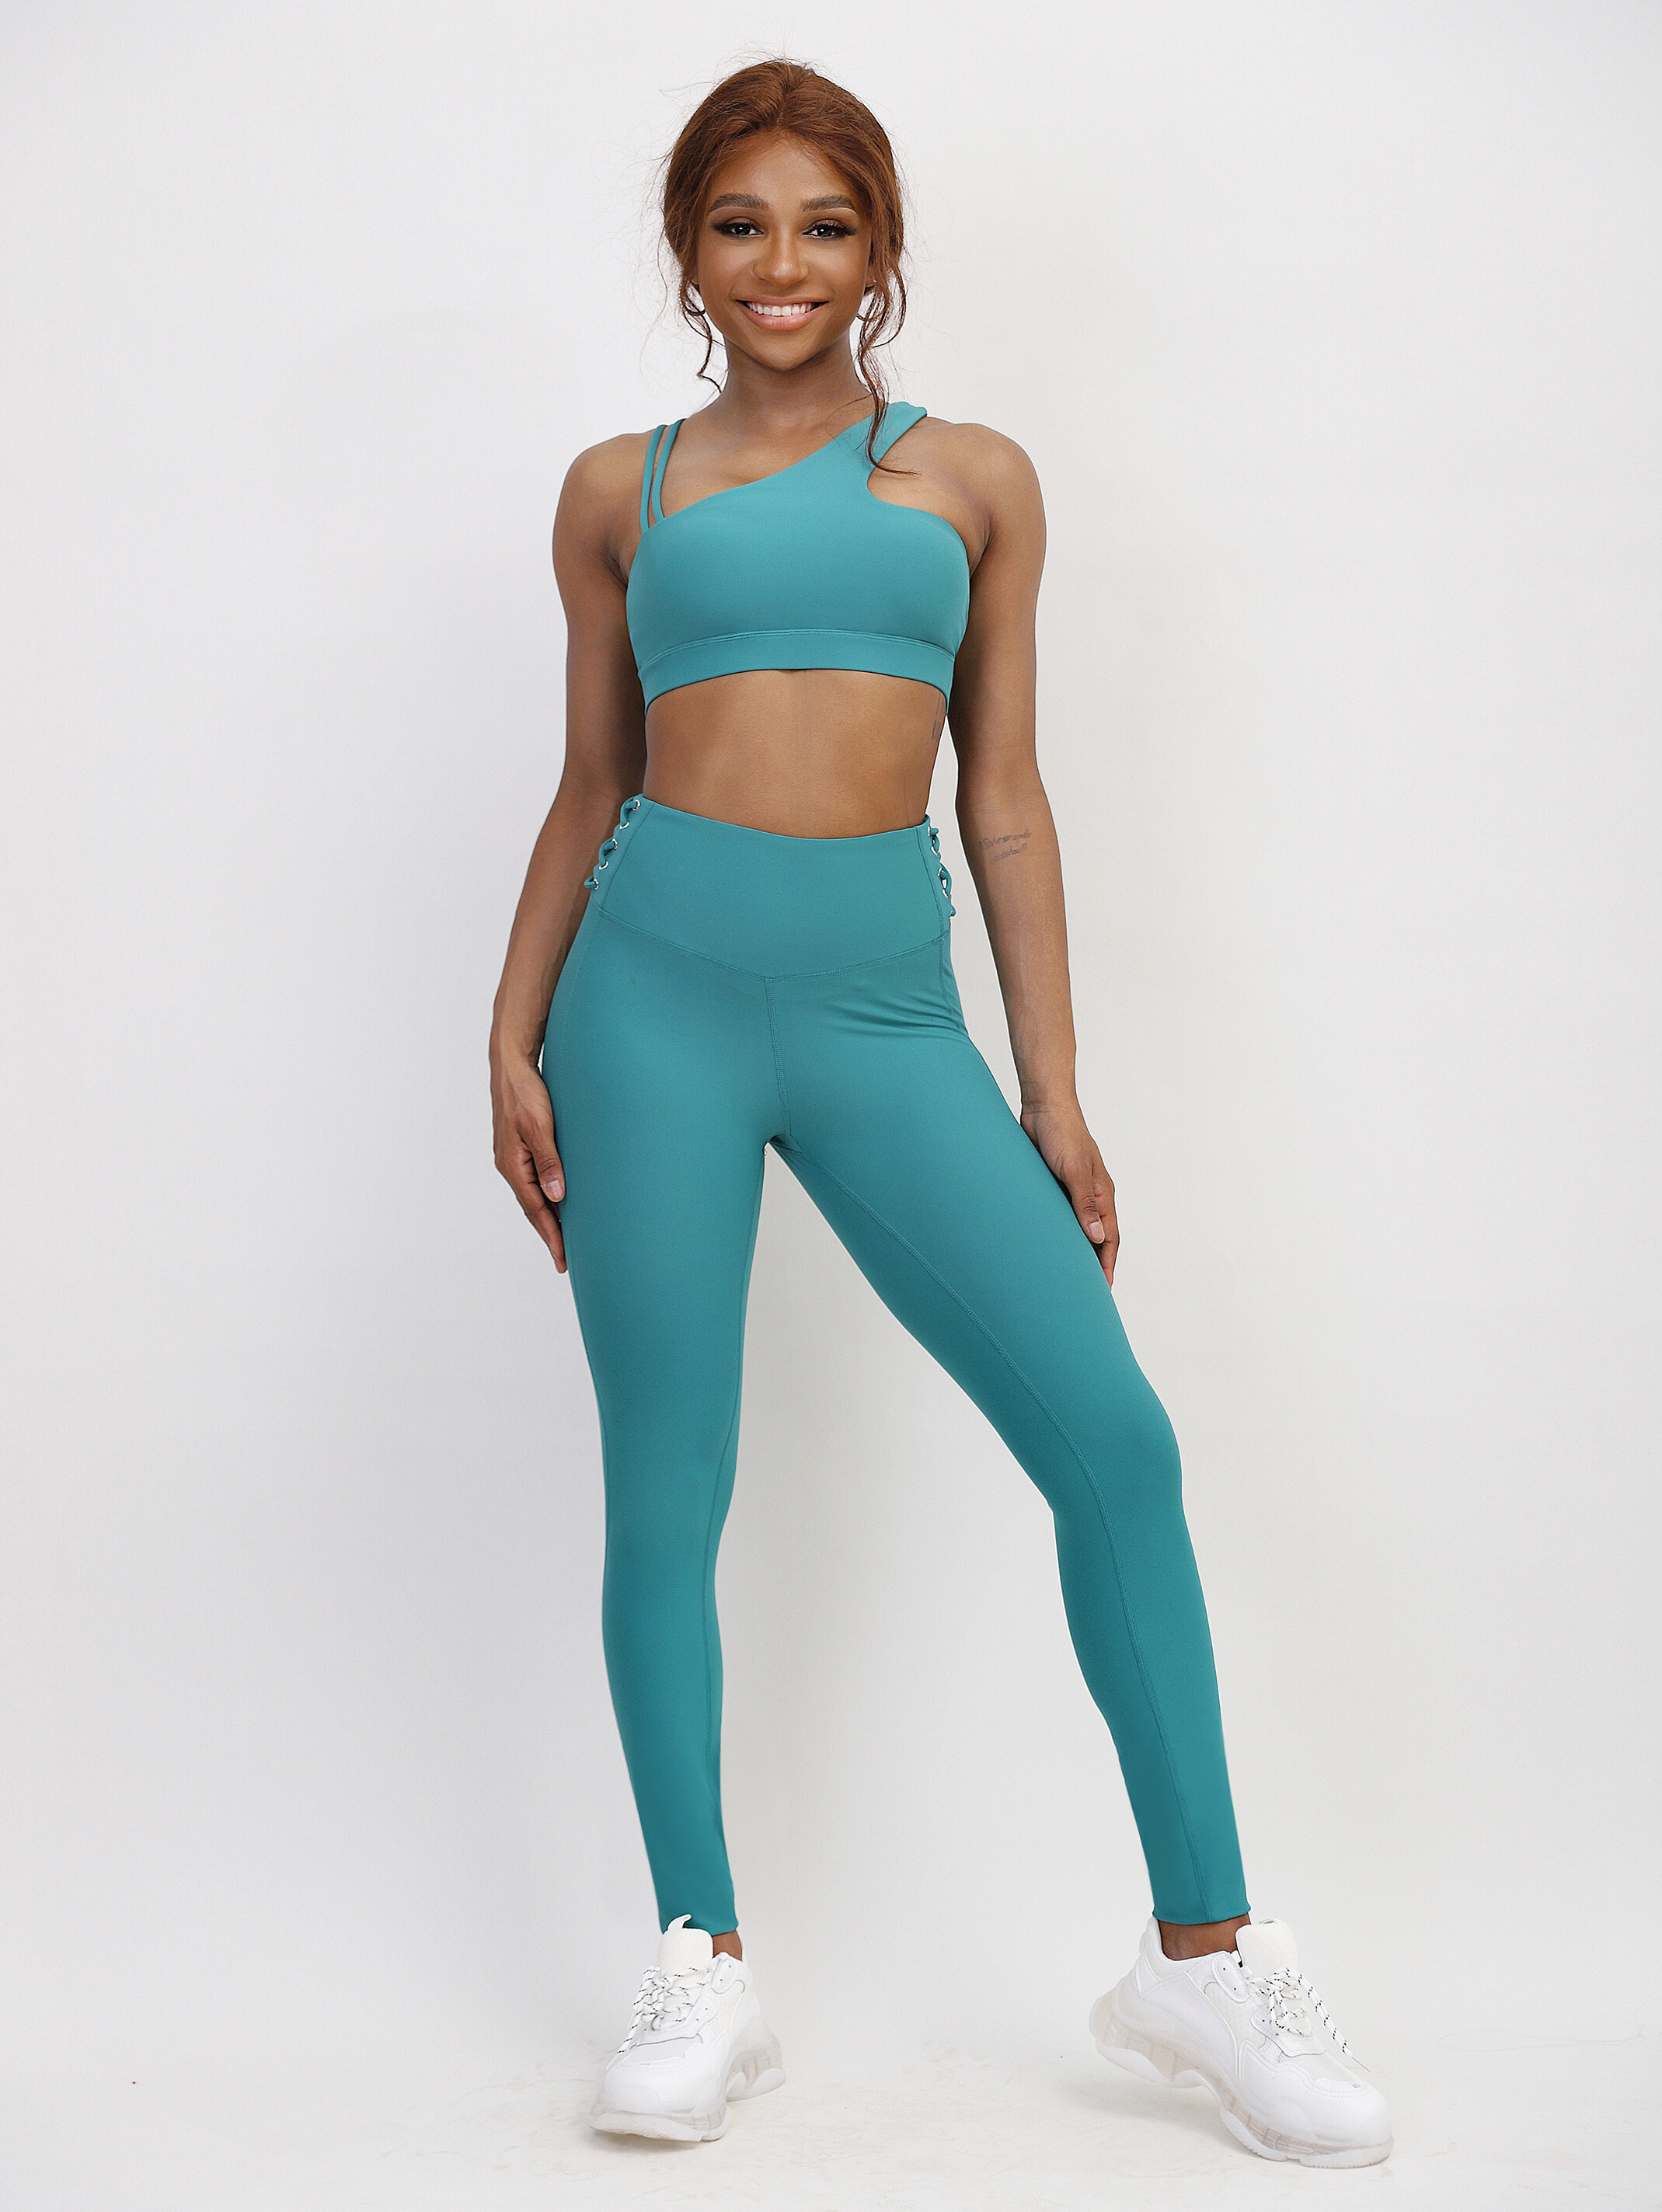 Lace up high waist cross back strap teal active wear